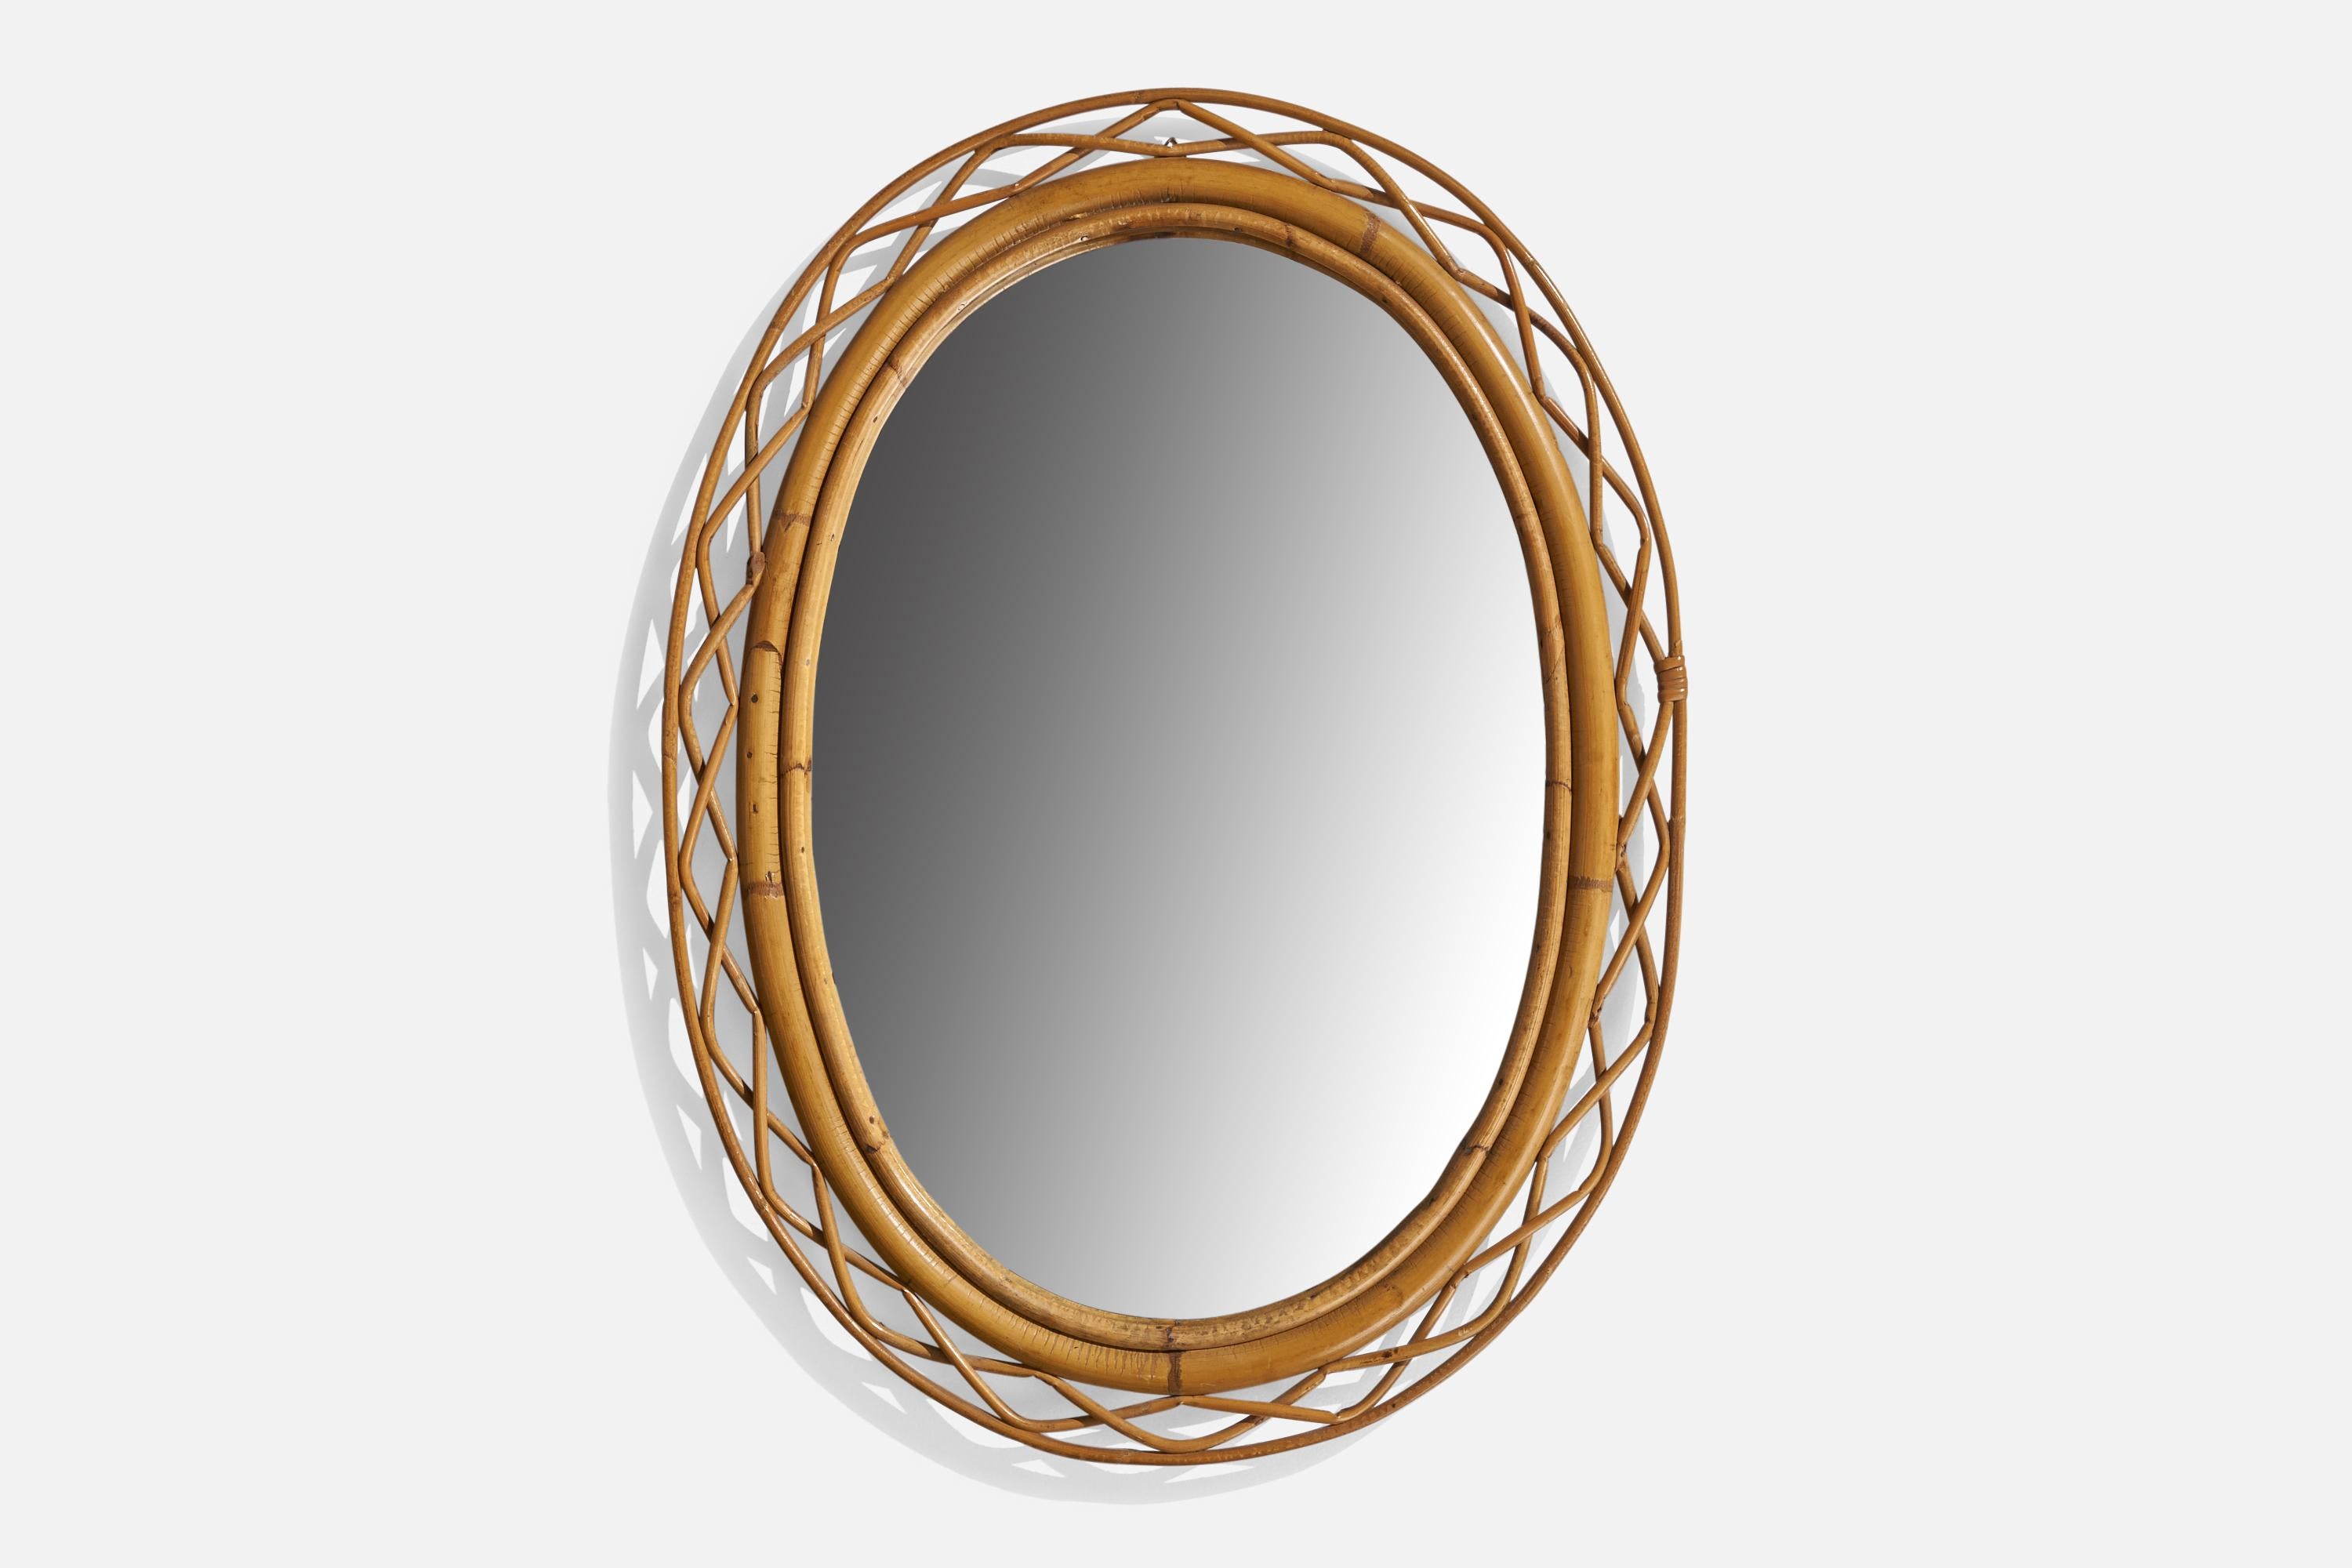 A rattan and bamboo wall mirror designed and produced in Italy, 1960s.